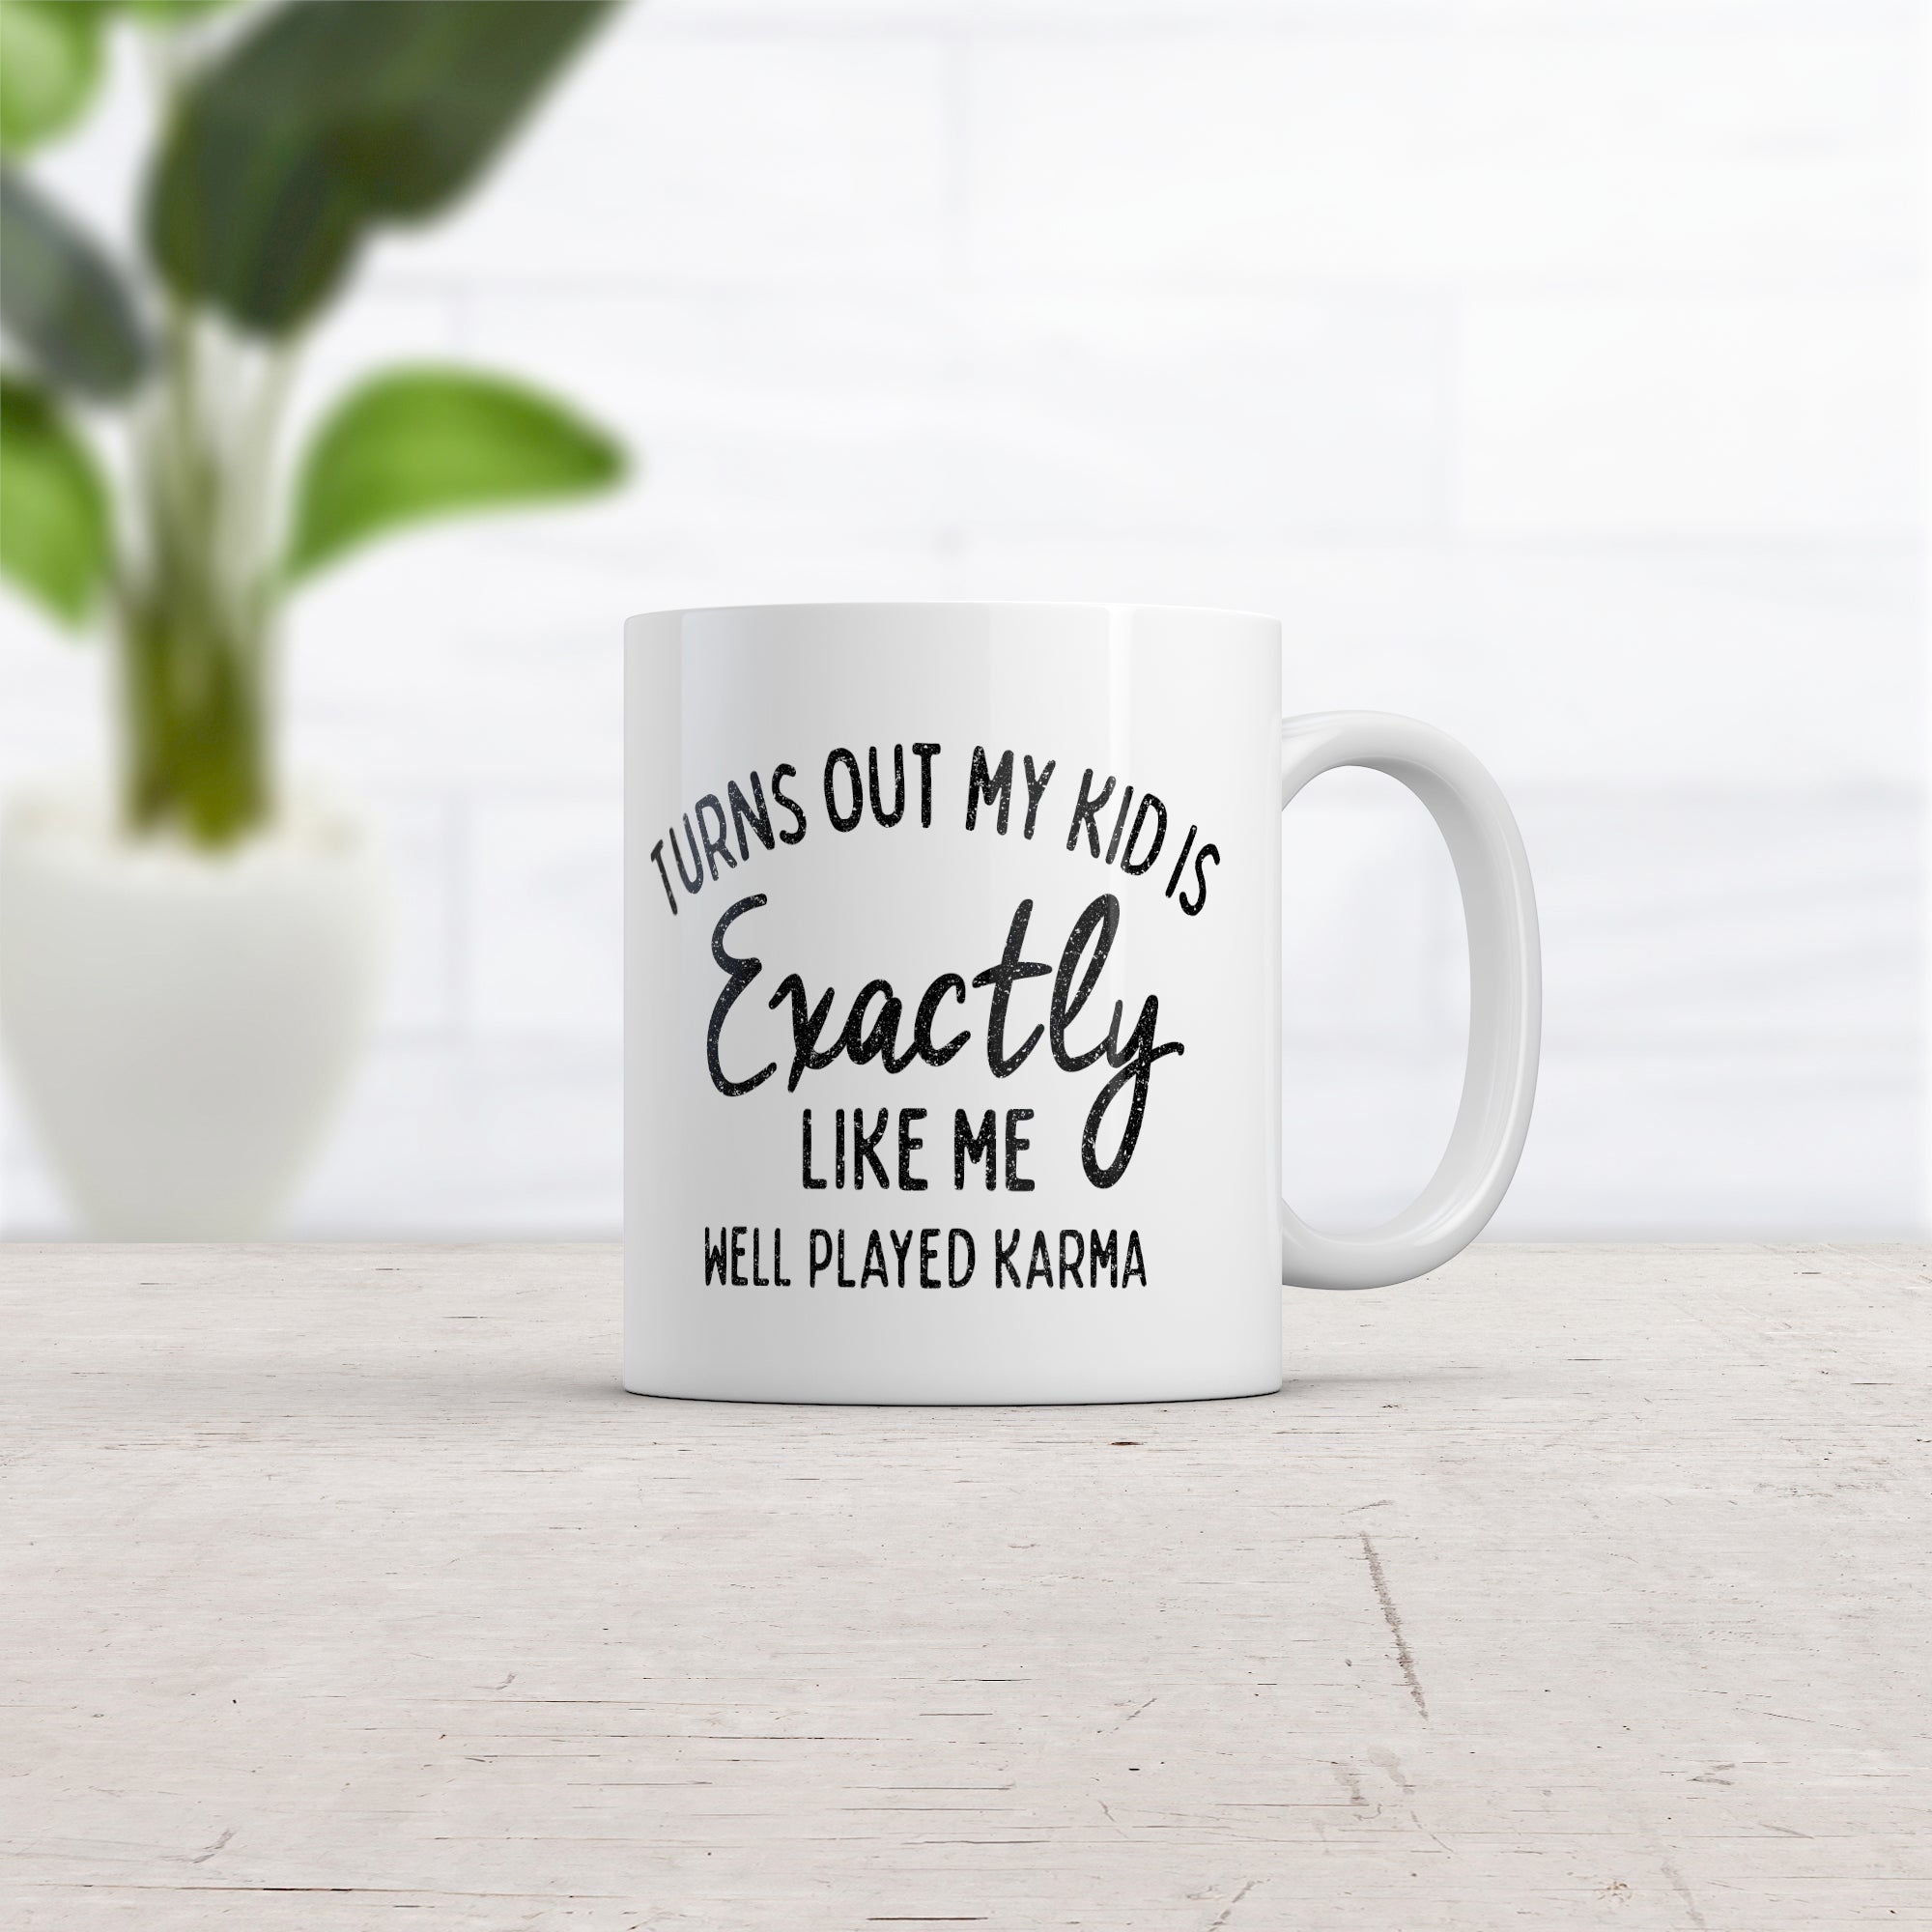 Funny White Turns Out My Kid Is Exactly Like Me Coffee Mug Nerdy Sarcastic Tee